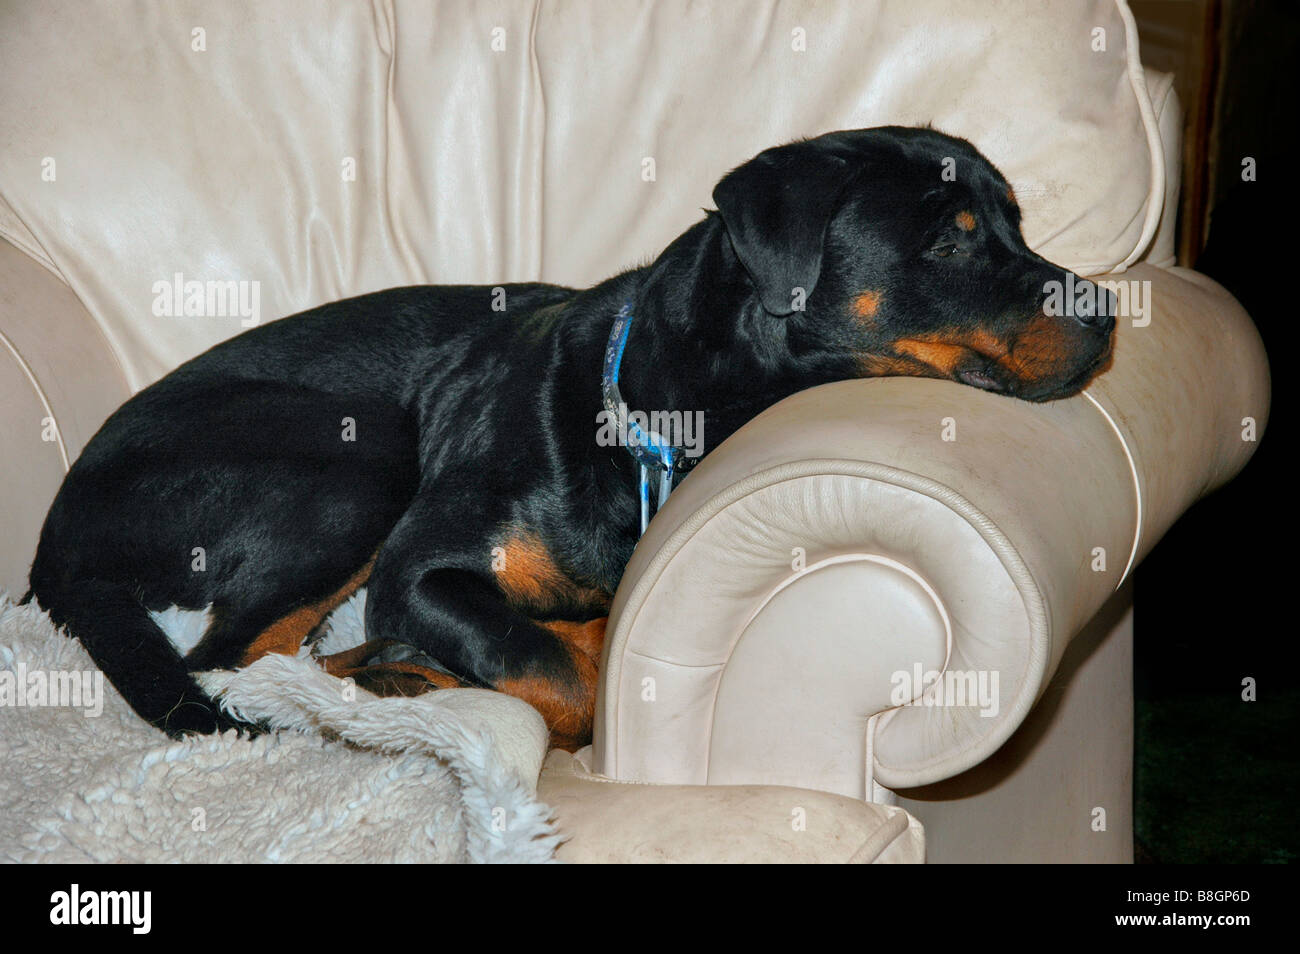 A young rottweiler dog lies on a leather armchair. Stock Photo